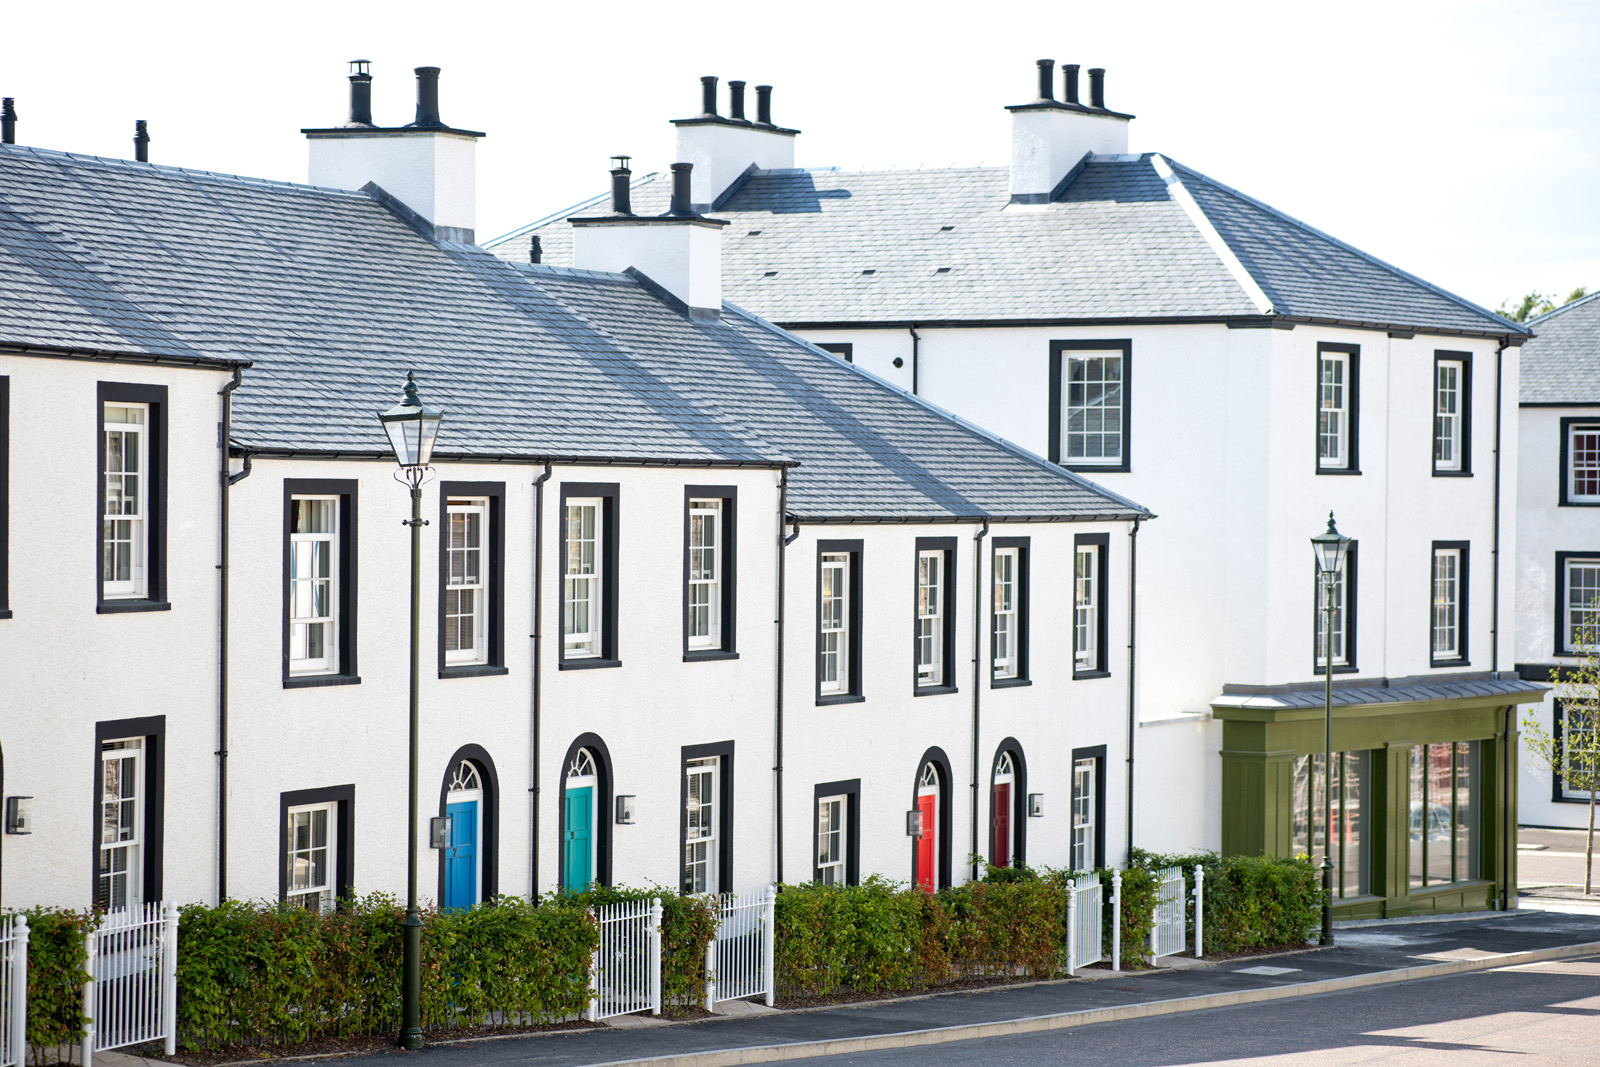 Places for People developments in Scotland honoured at What House 2020 awards